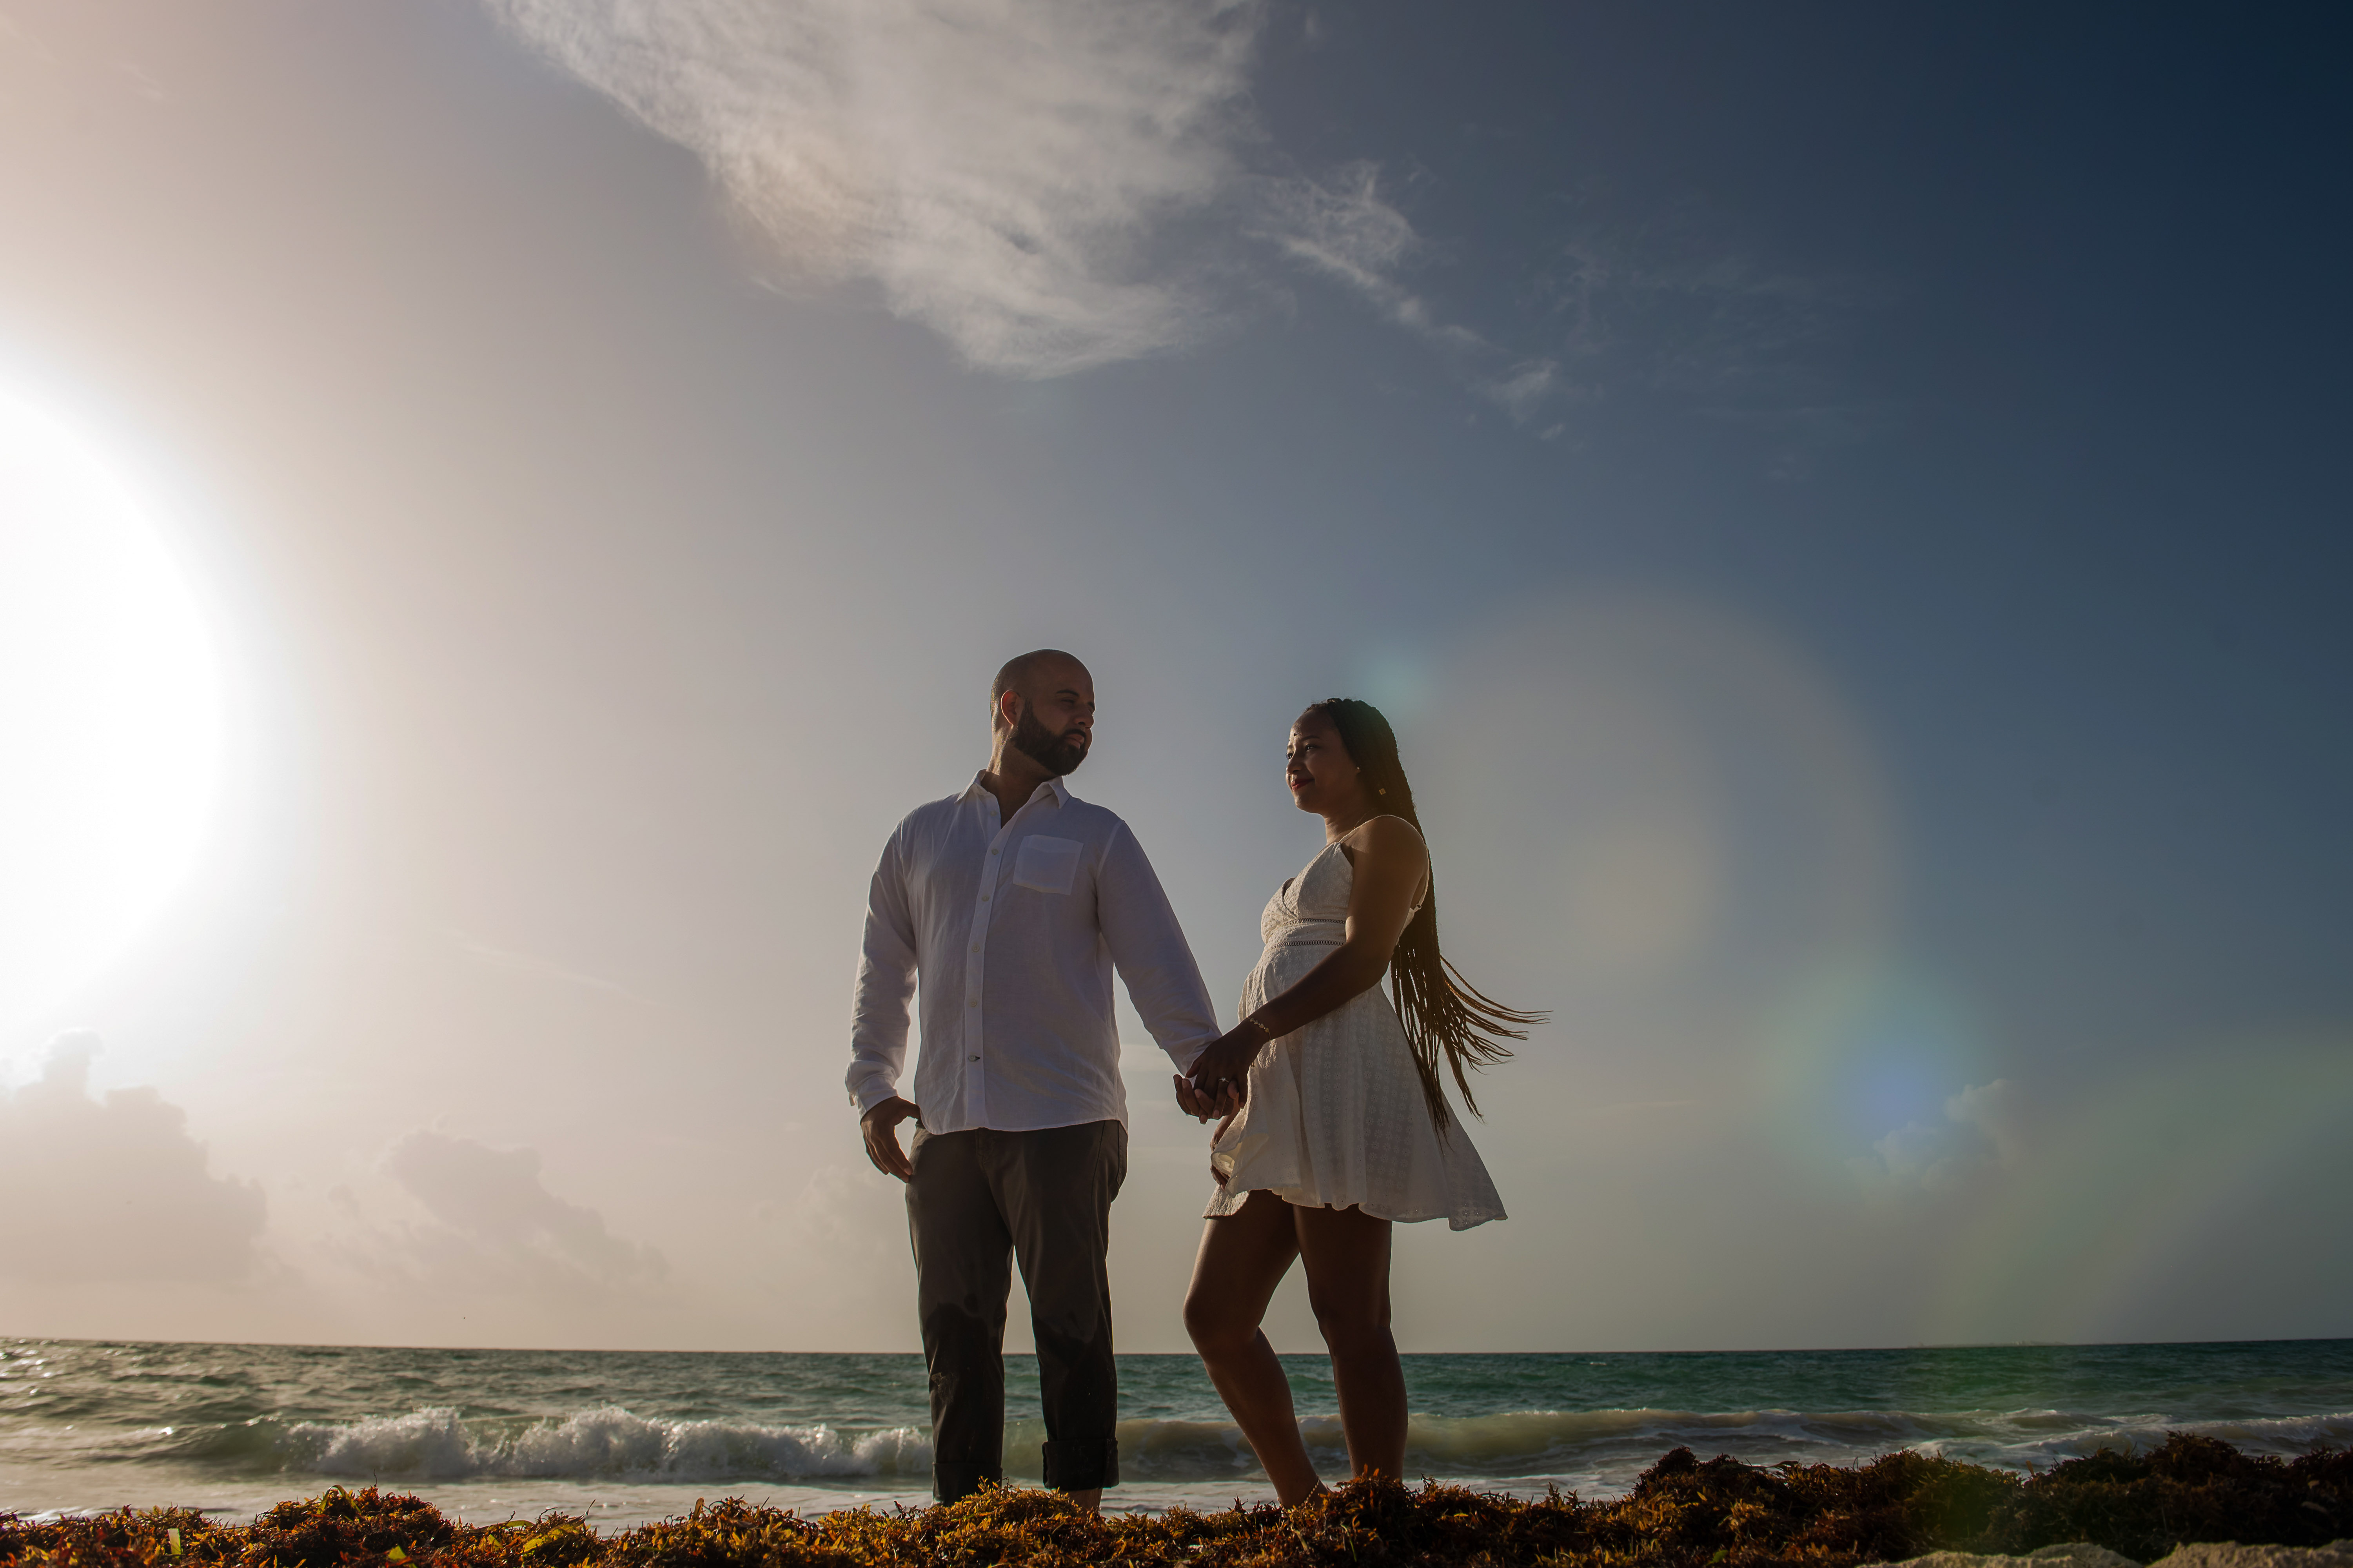 the sunrise at the beach with a couple posing with a view to the ocean at Isla Blanca Cancun and the Riu Costa Mujeres